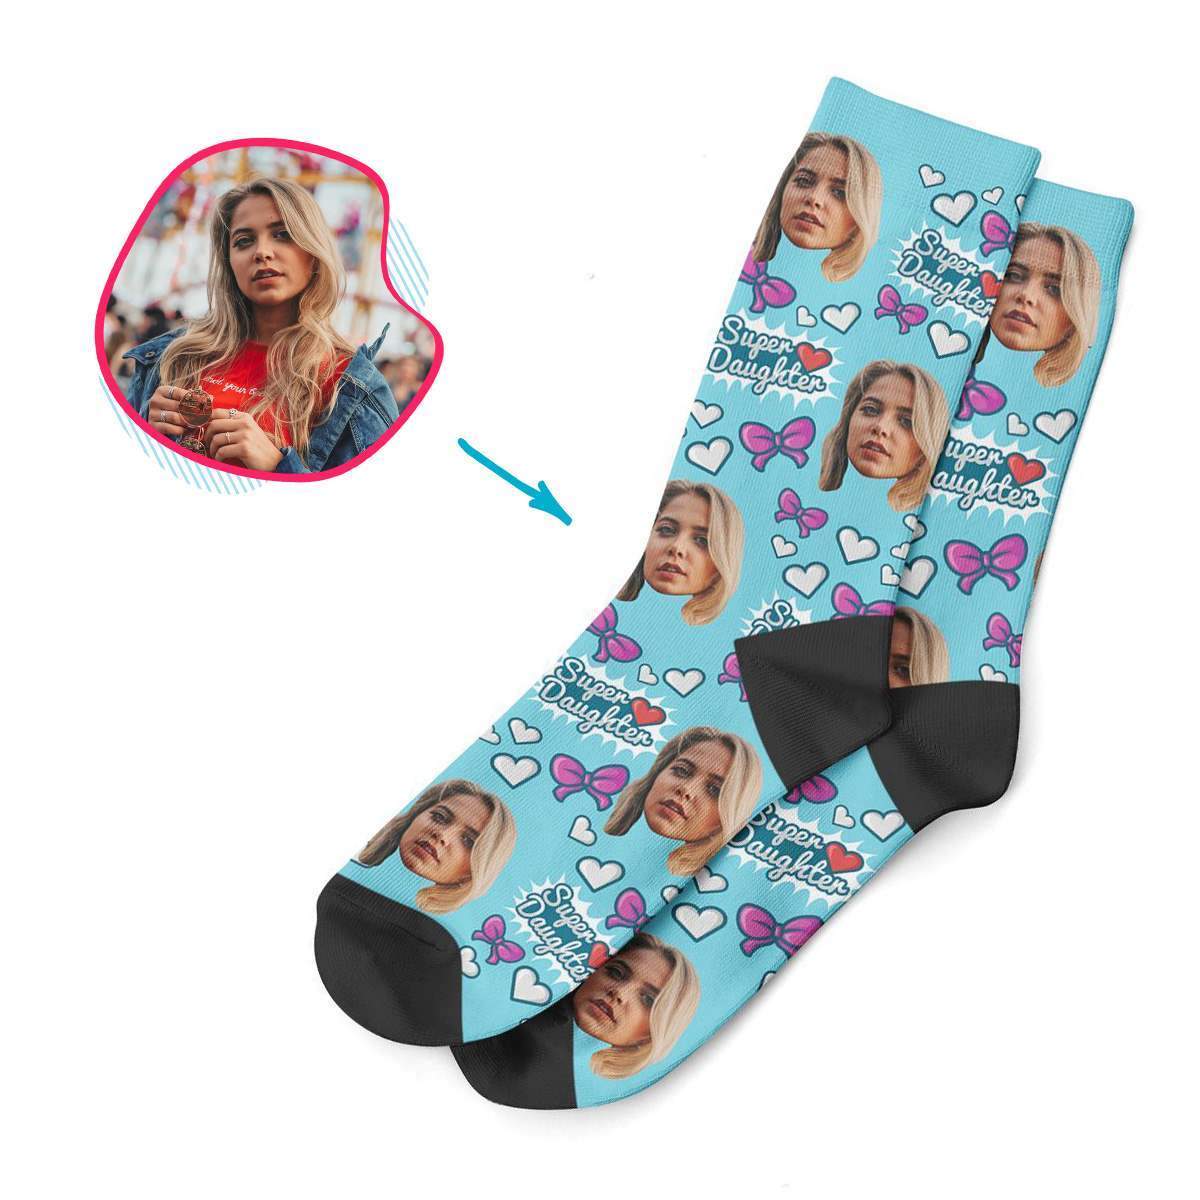 blue Super Daughter socks personalized with photo of face printed on them